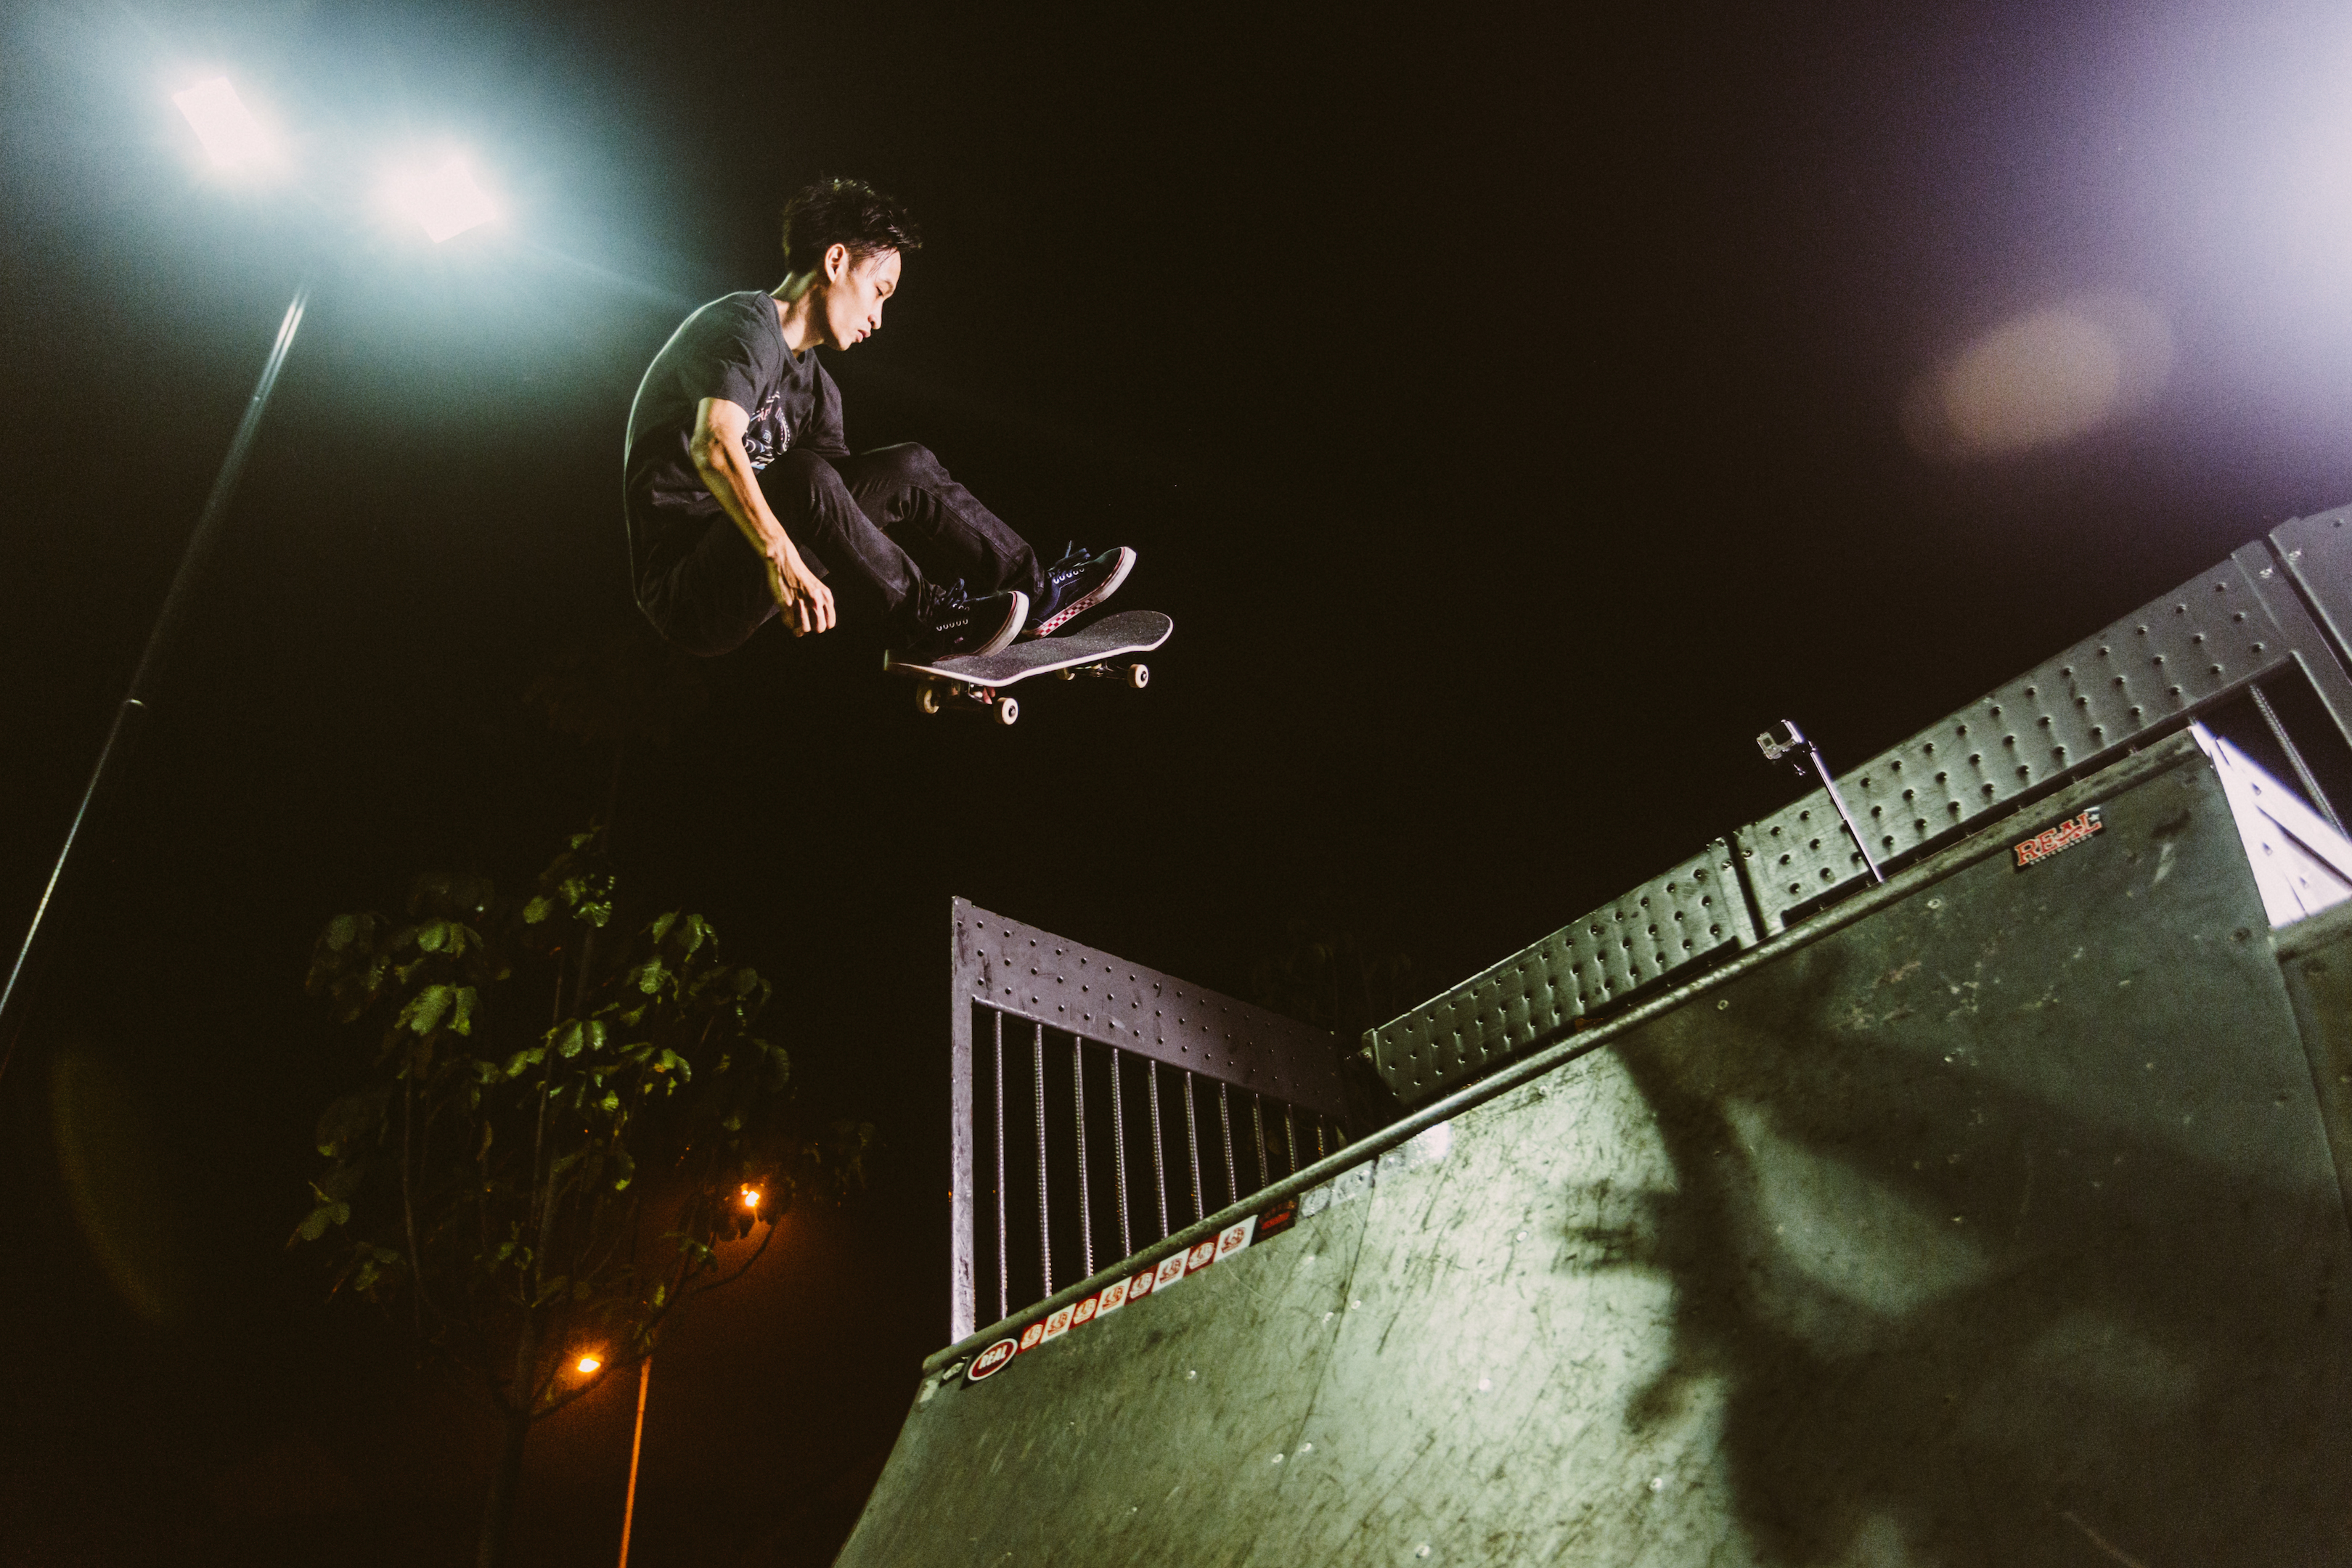 BIG AIR: Firdaus Rahman goes large with a backside grab at the Bishan Harmony skatepark a week before his Tampa Pro competition.